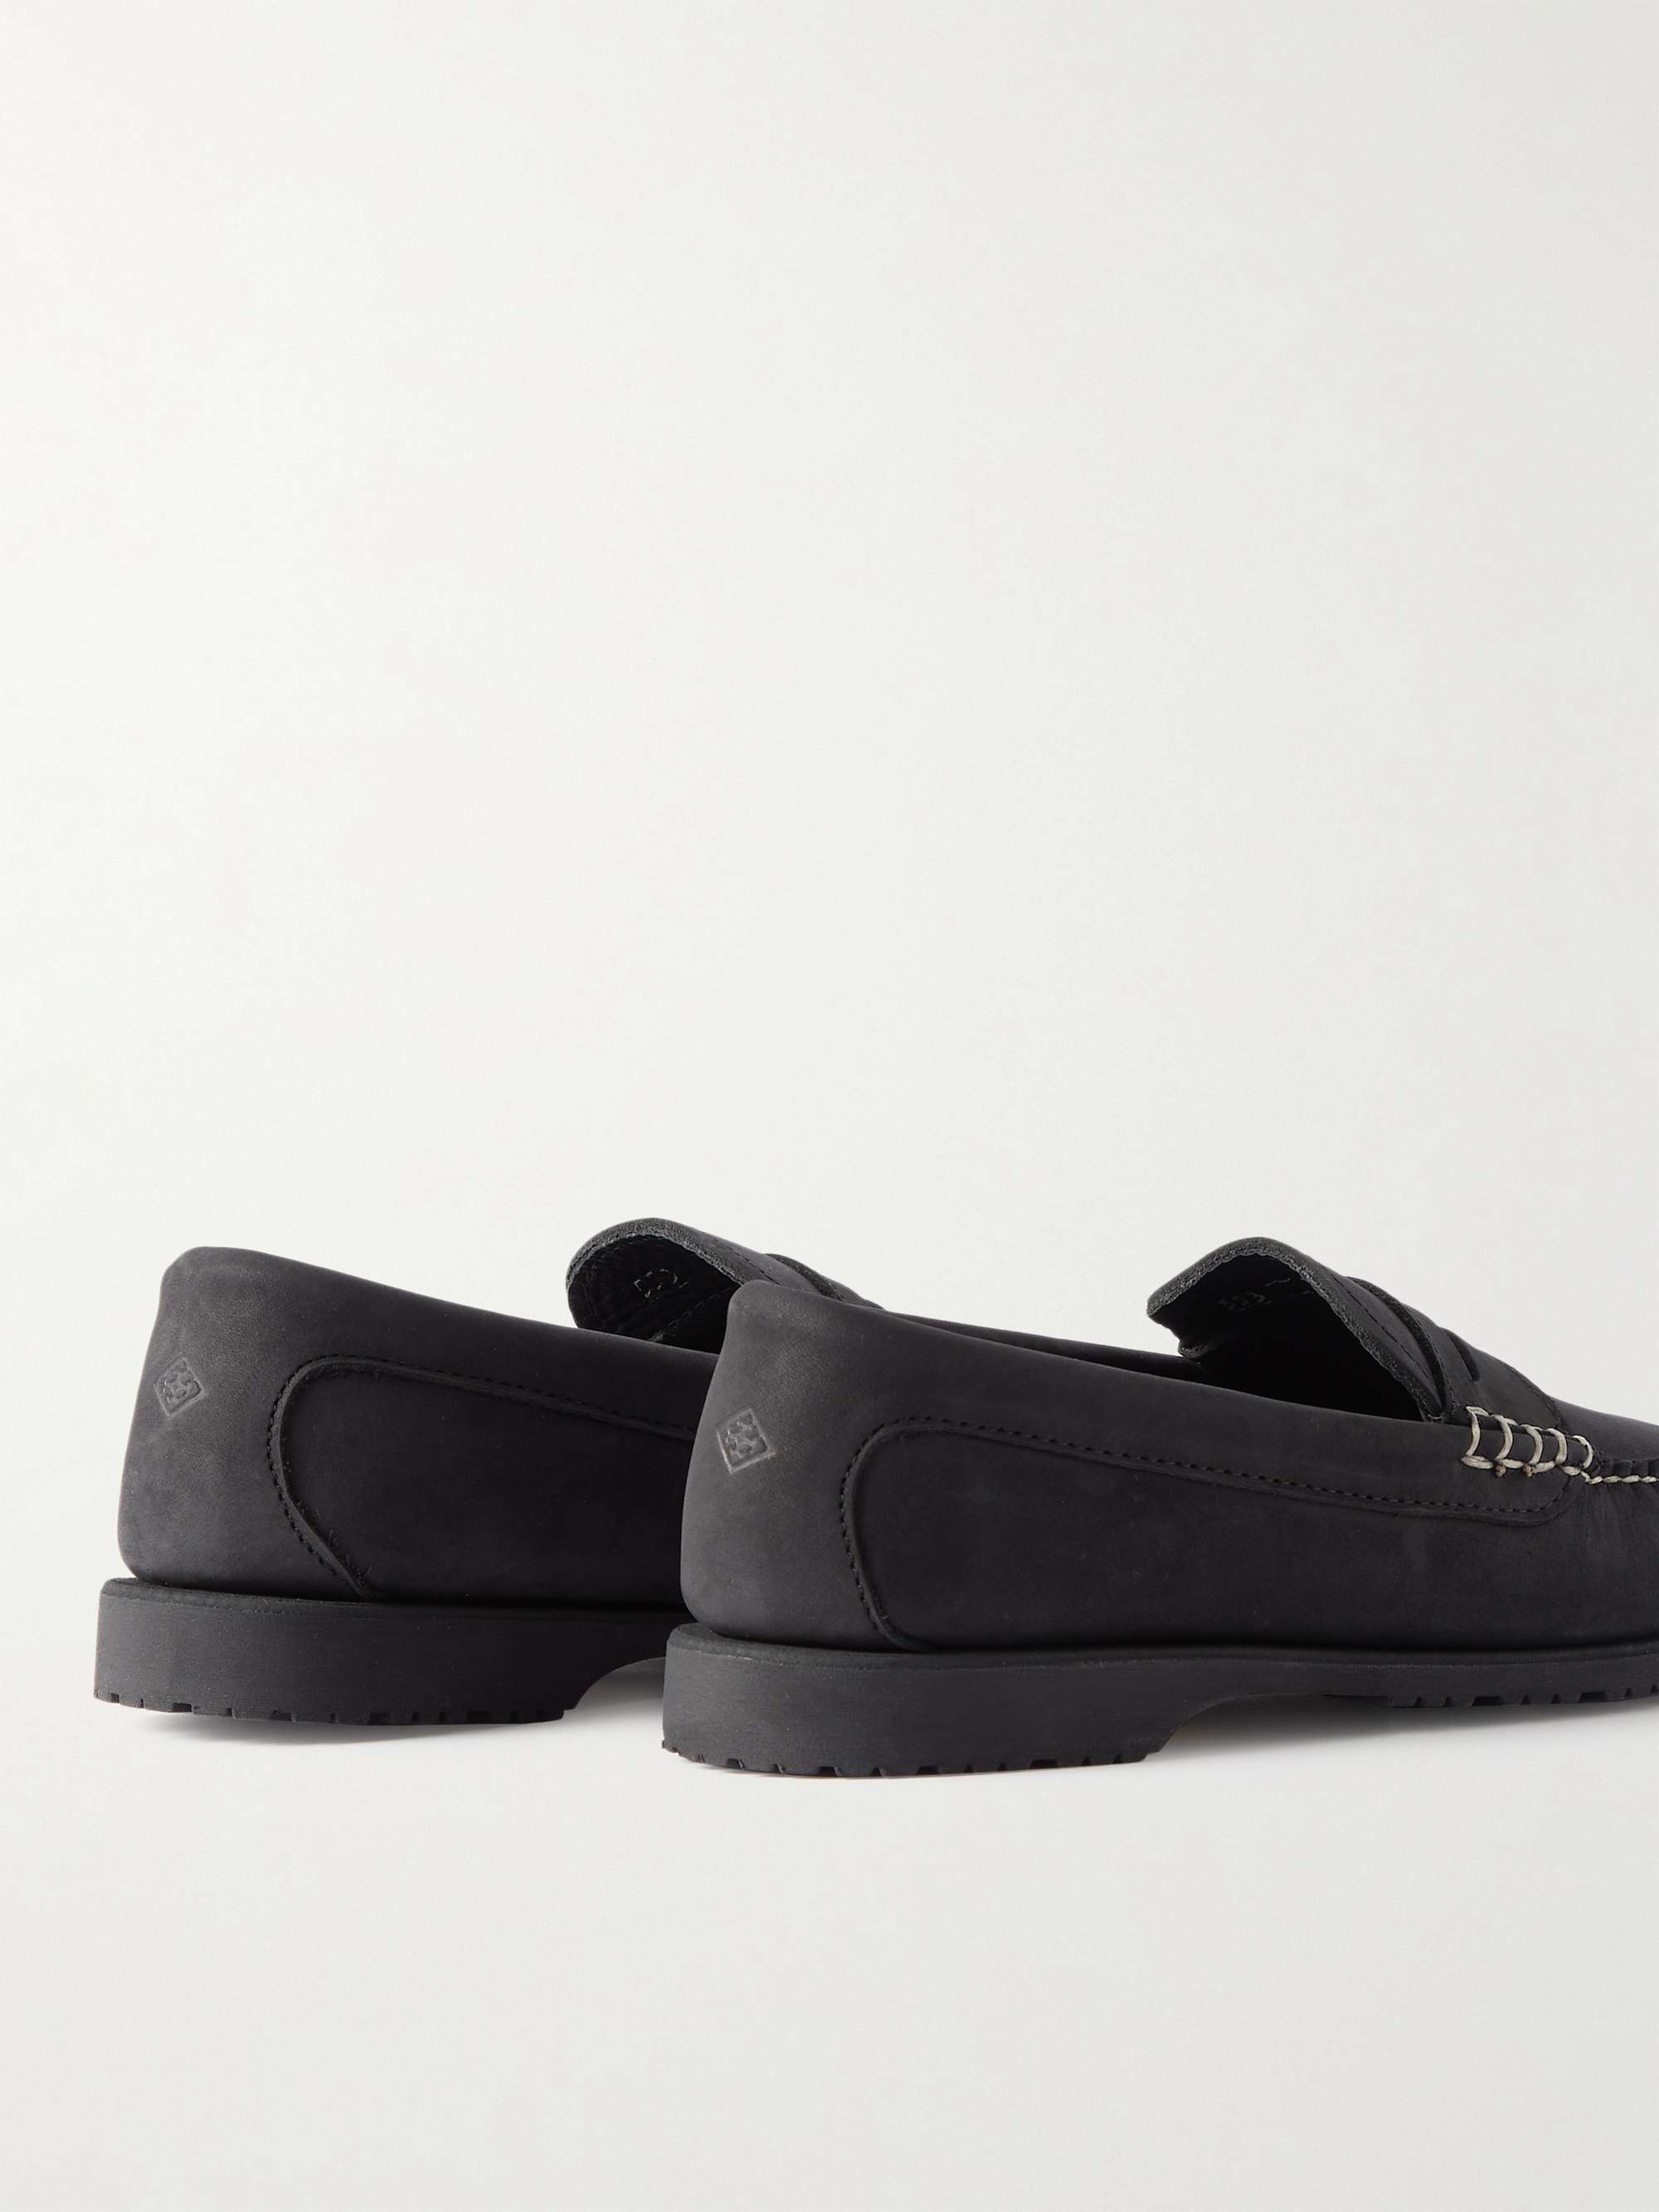 QUODDY Rover Capetown Suede Penny Loafers